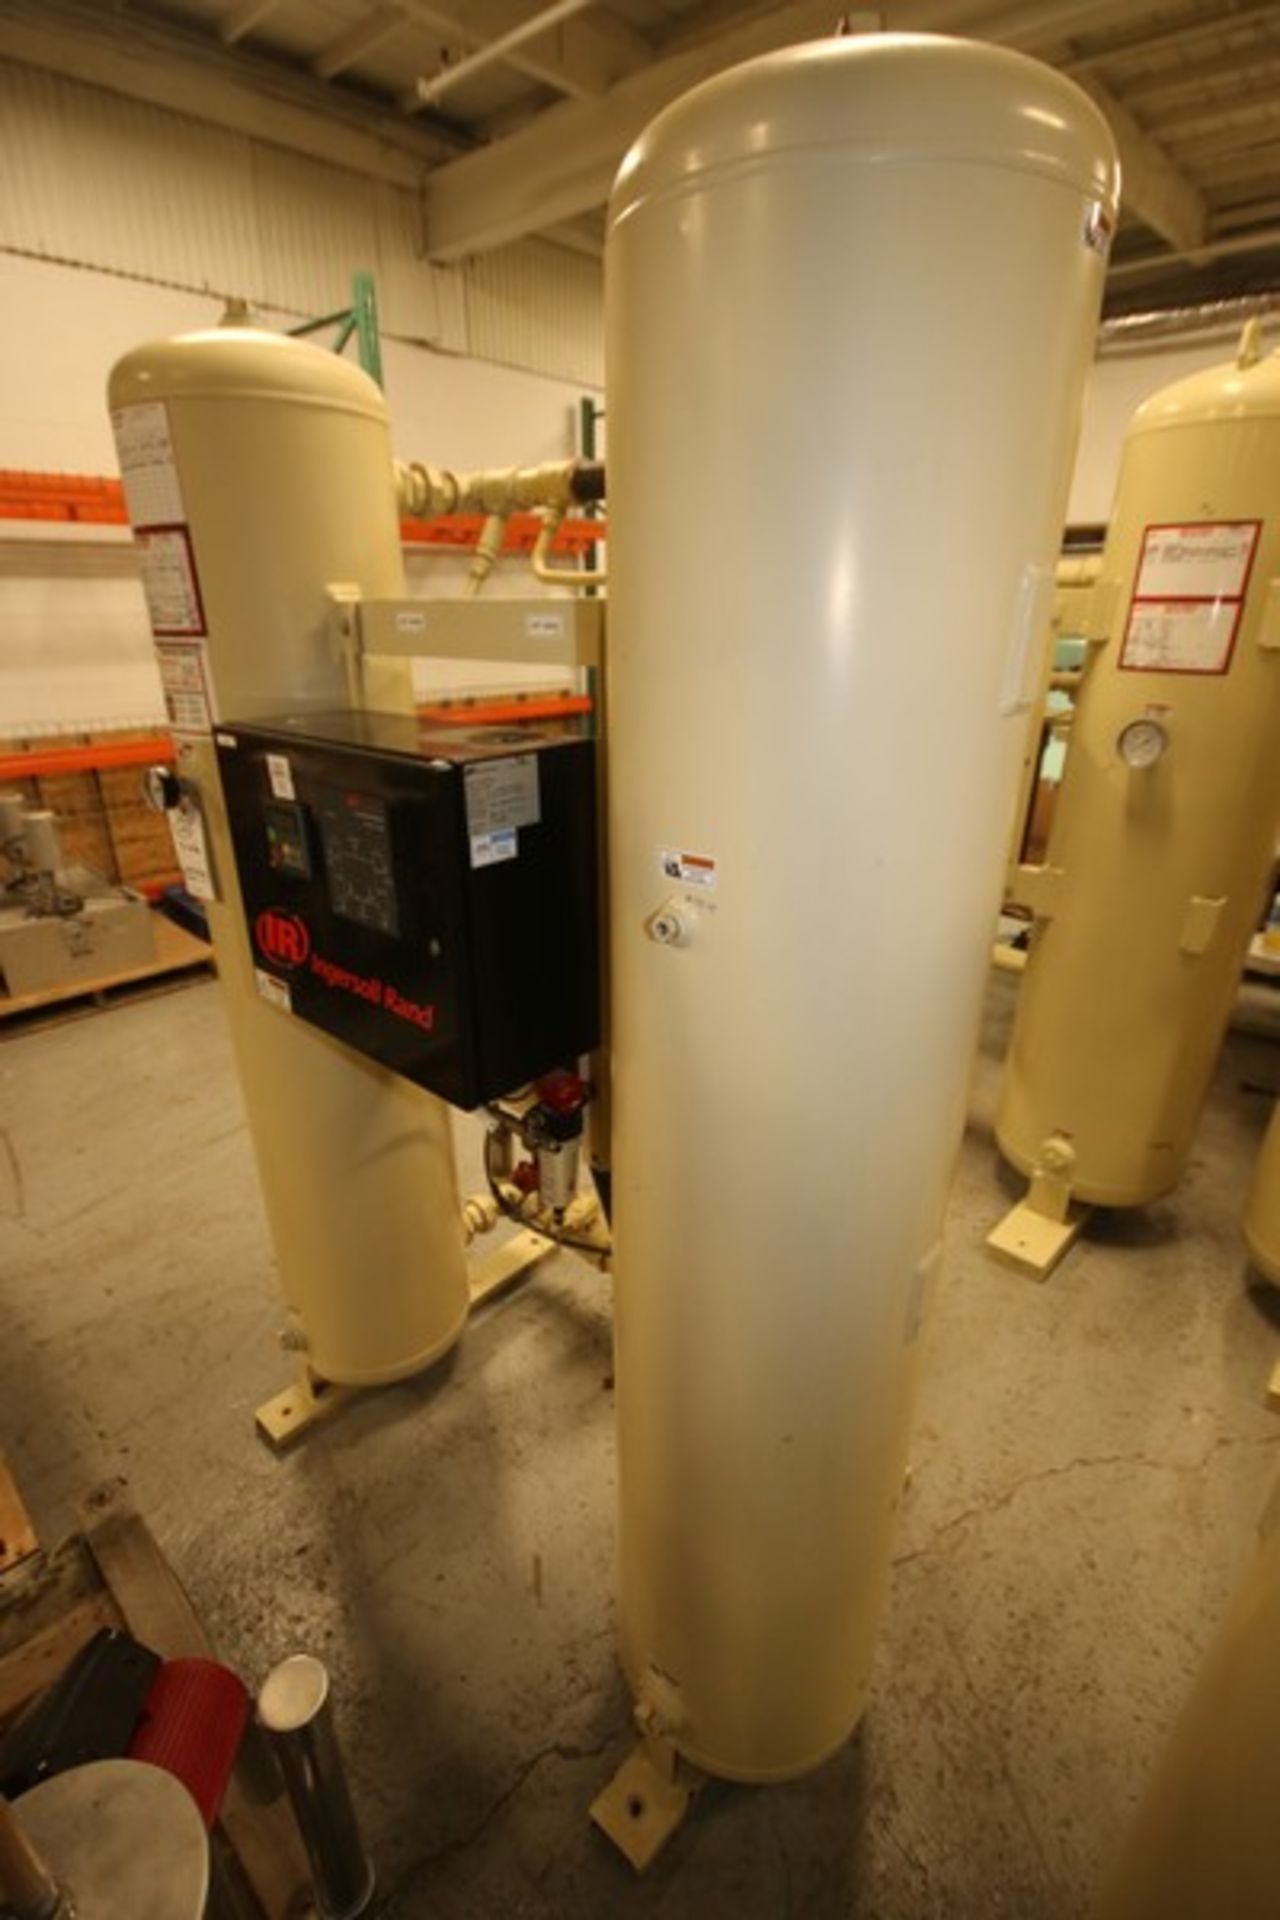 2011 Ingersol Rand Desiccant Air Dryer, Model HL6001HE0AA, SN 519833, 150 PSIG, Single Phase with - Image 2 of 4